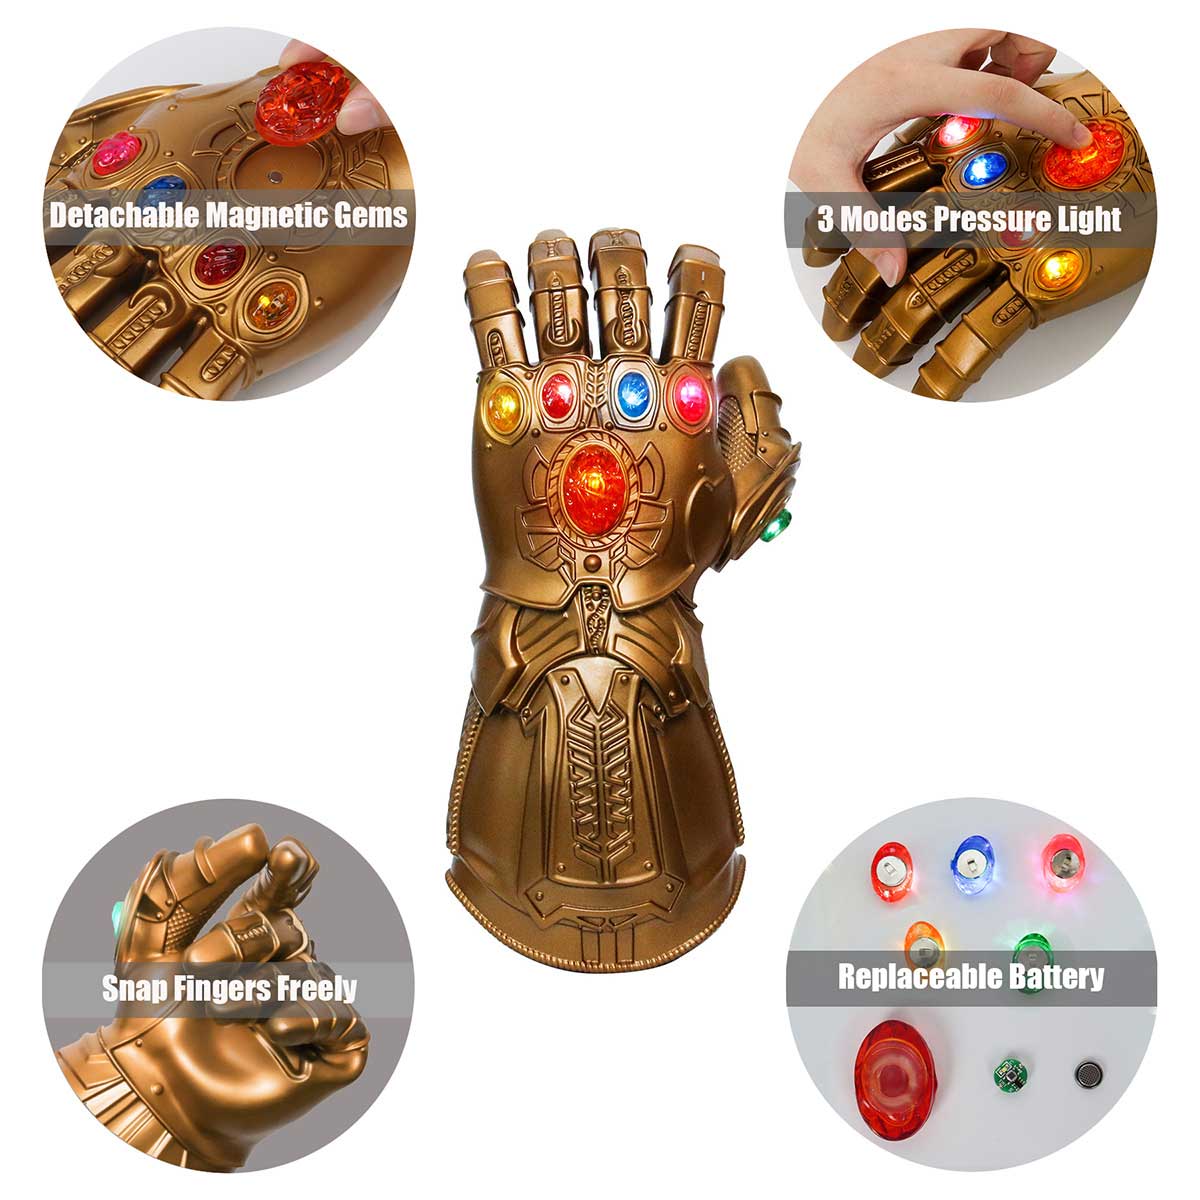 Thanos Infinity Gauntlet LED Light Gloves Cosplay Infinity War The Avengers Prop 